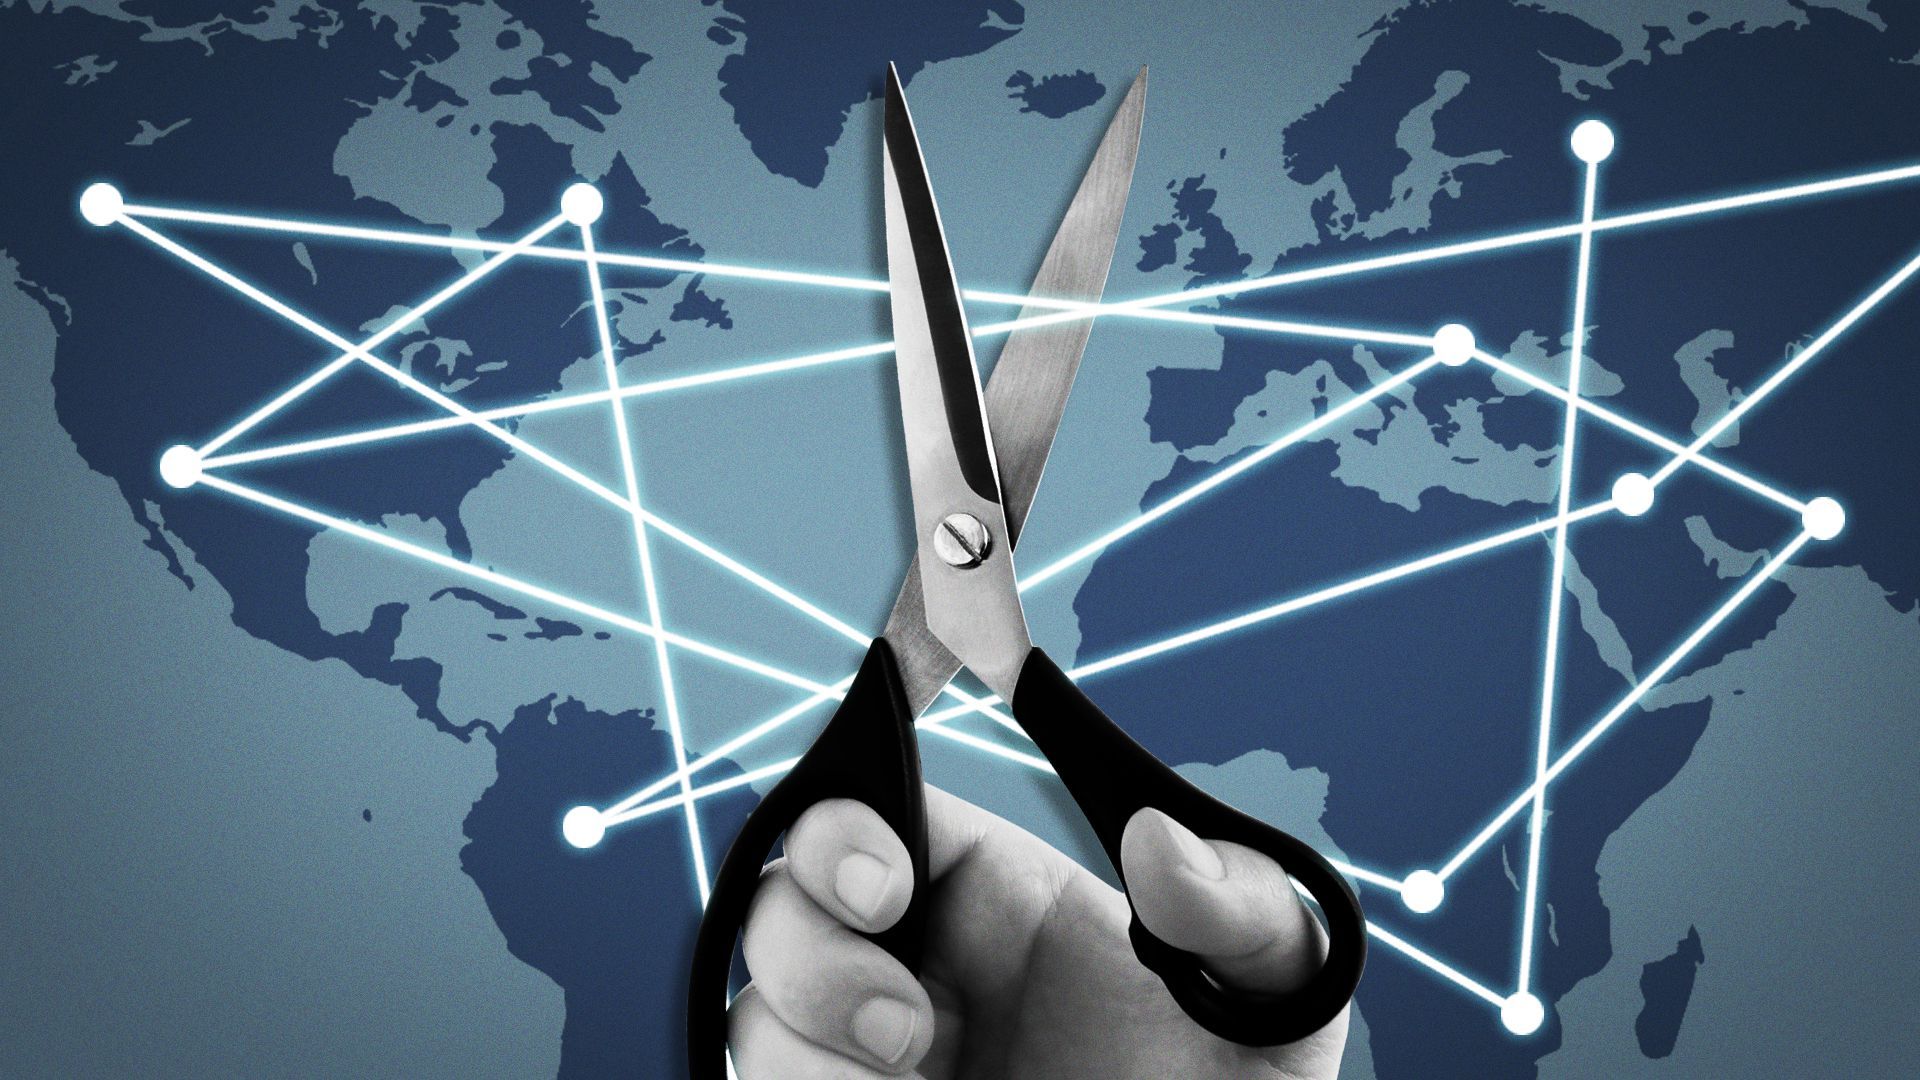 Illustration of scissors about to cut into flight paths on a map. 